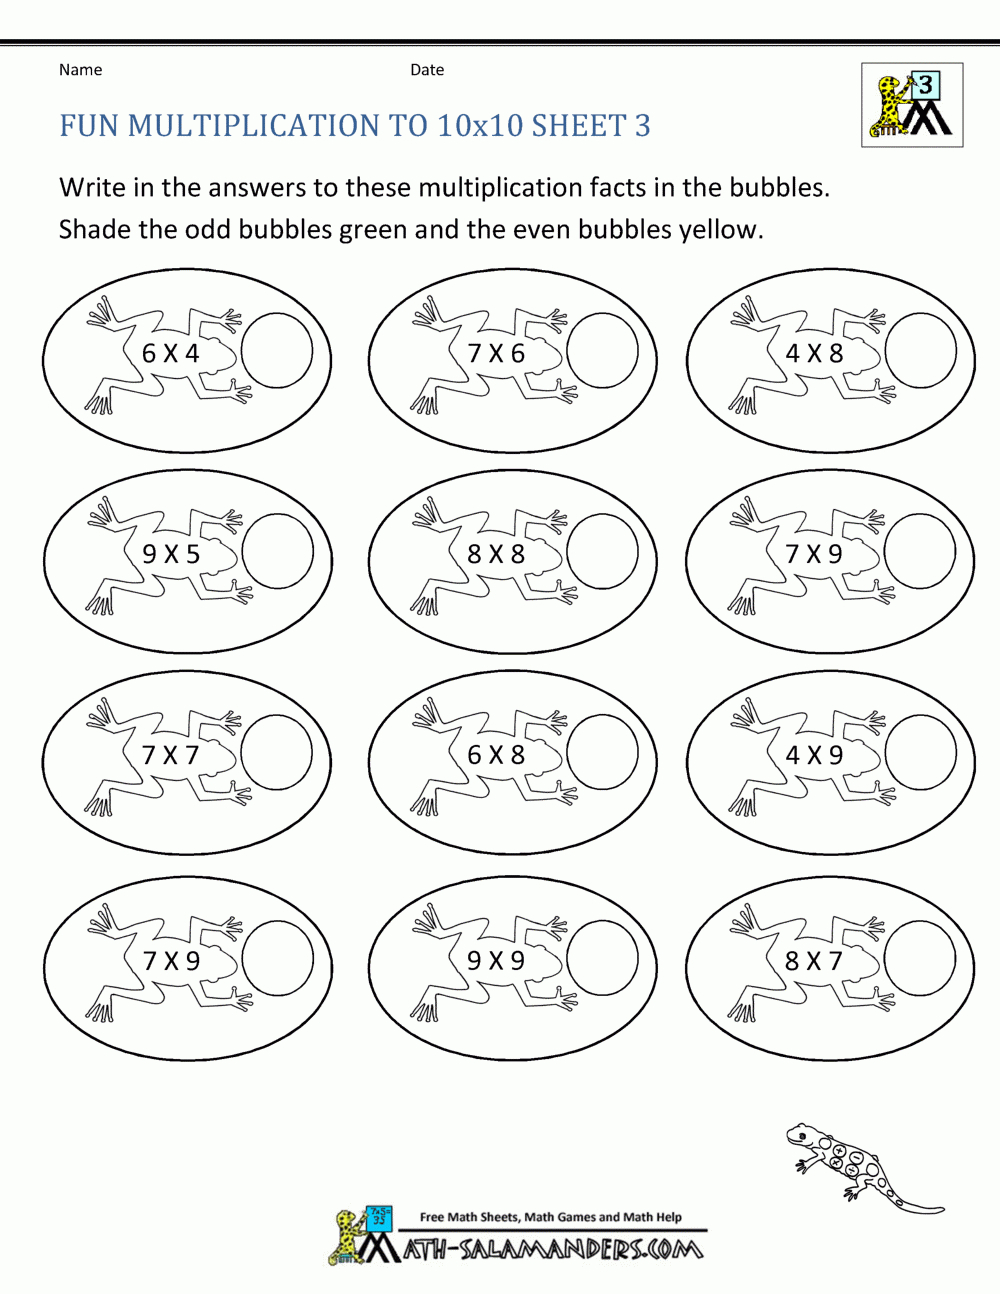 Fun Multiplication Worksheets To 10X10 with Homeschool Multiplication Worksheets